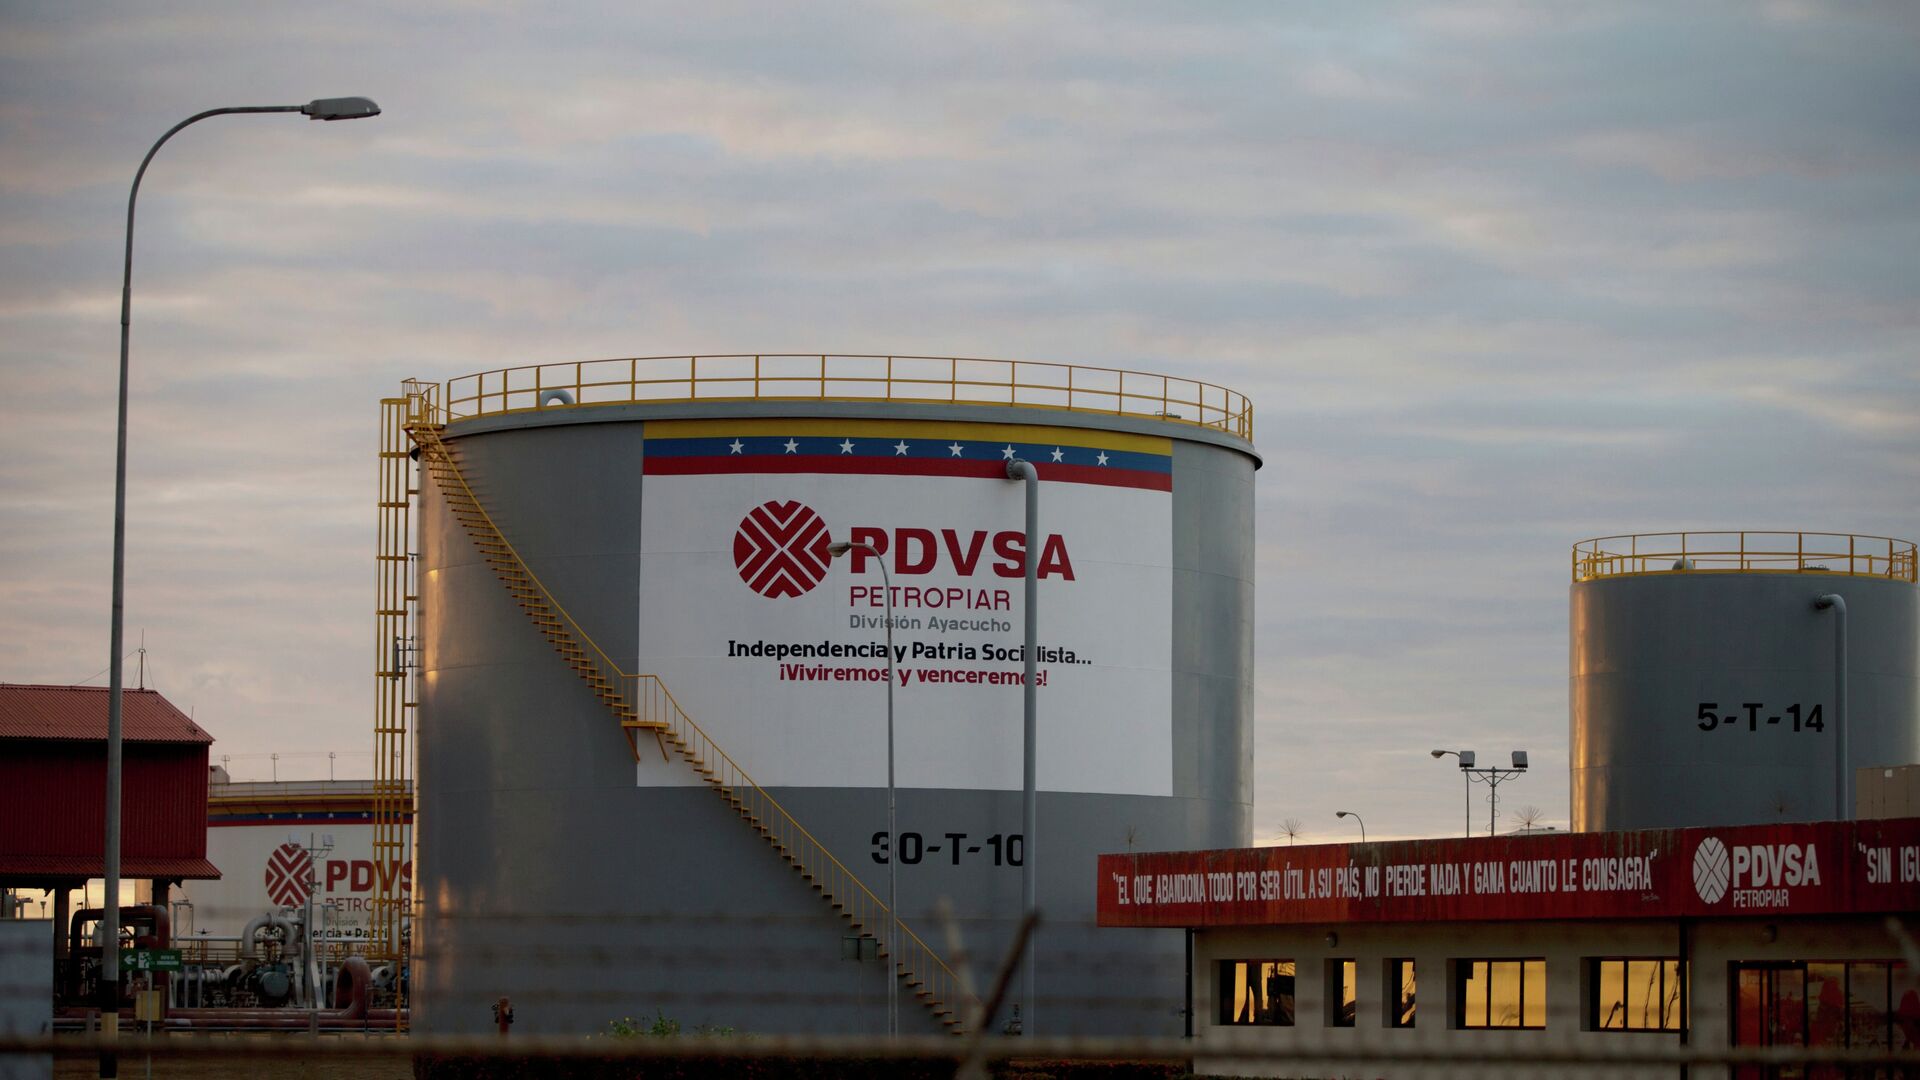 Storage tanks stand in a PDVSA state-run oil company crude oil complex near El Tigre, a town located within Venezuela's Hugo Chavez oil belt, formally known as the Orinoco Belt - Sputnik International, 1920, 10.03.2022